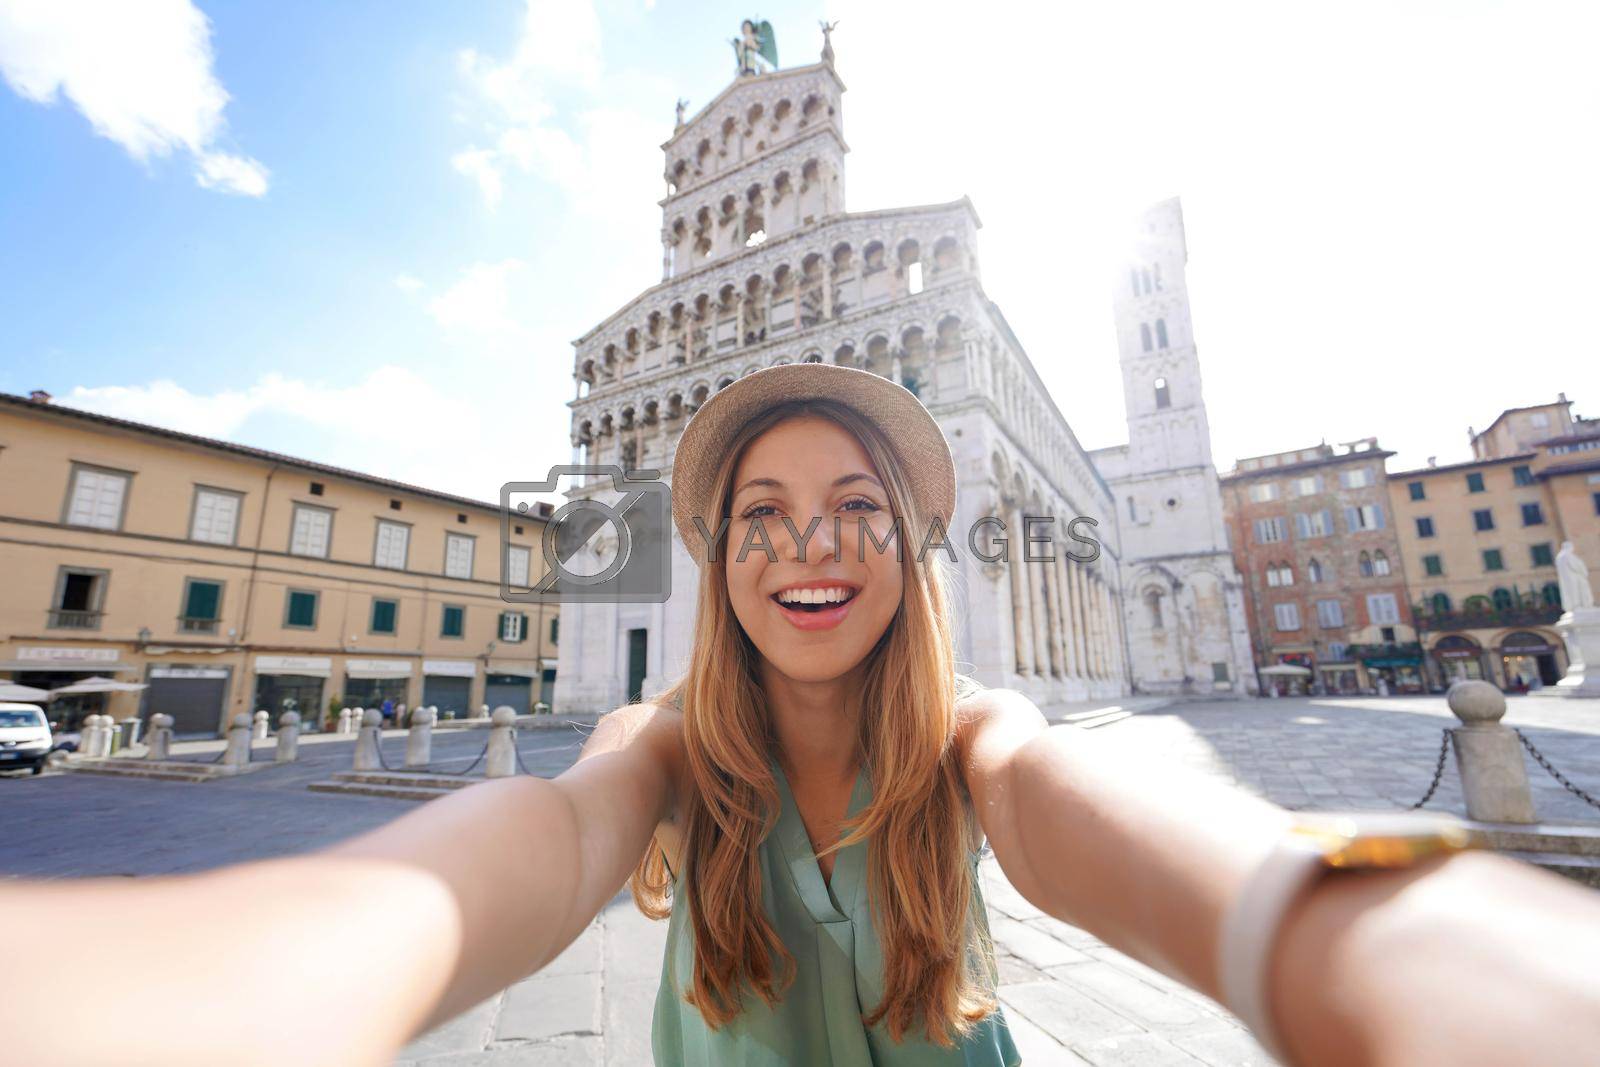 Royalty free image of Smiling traveler girl takes selfie photo in the historic town of Lucca, Tuscany, Italy by sergio_monti